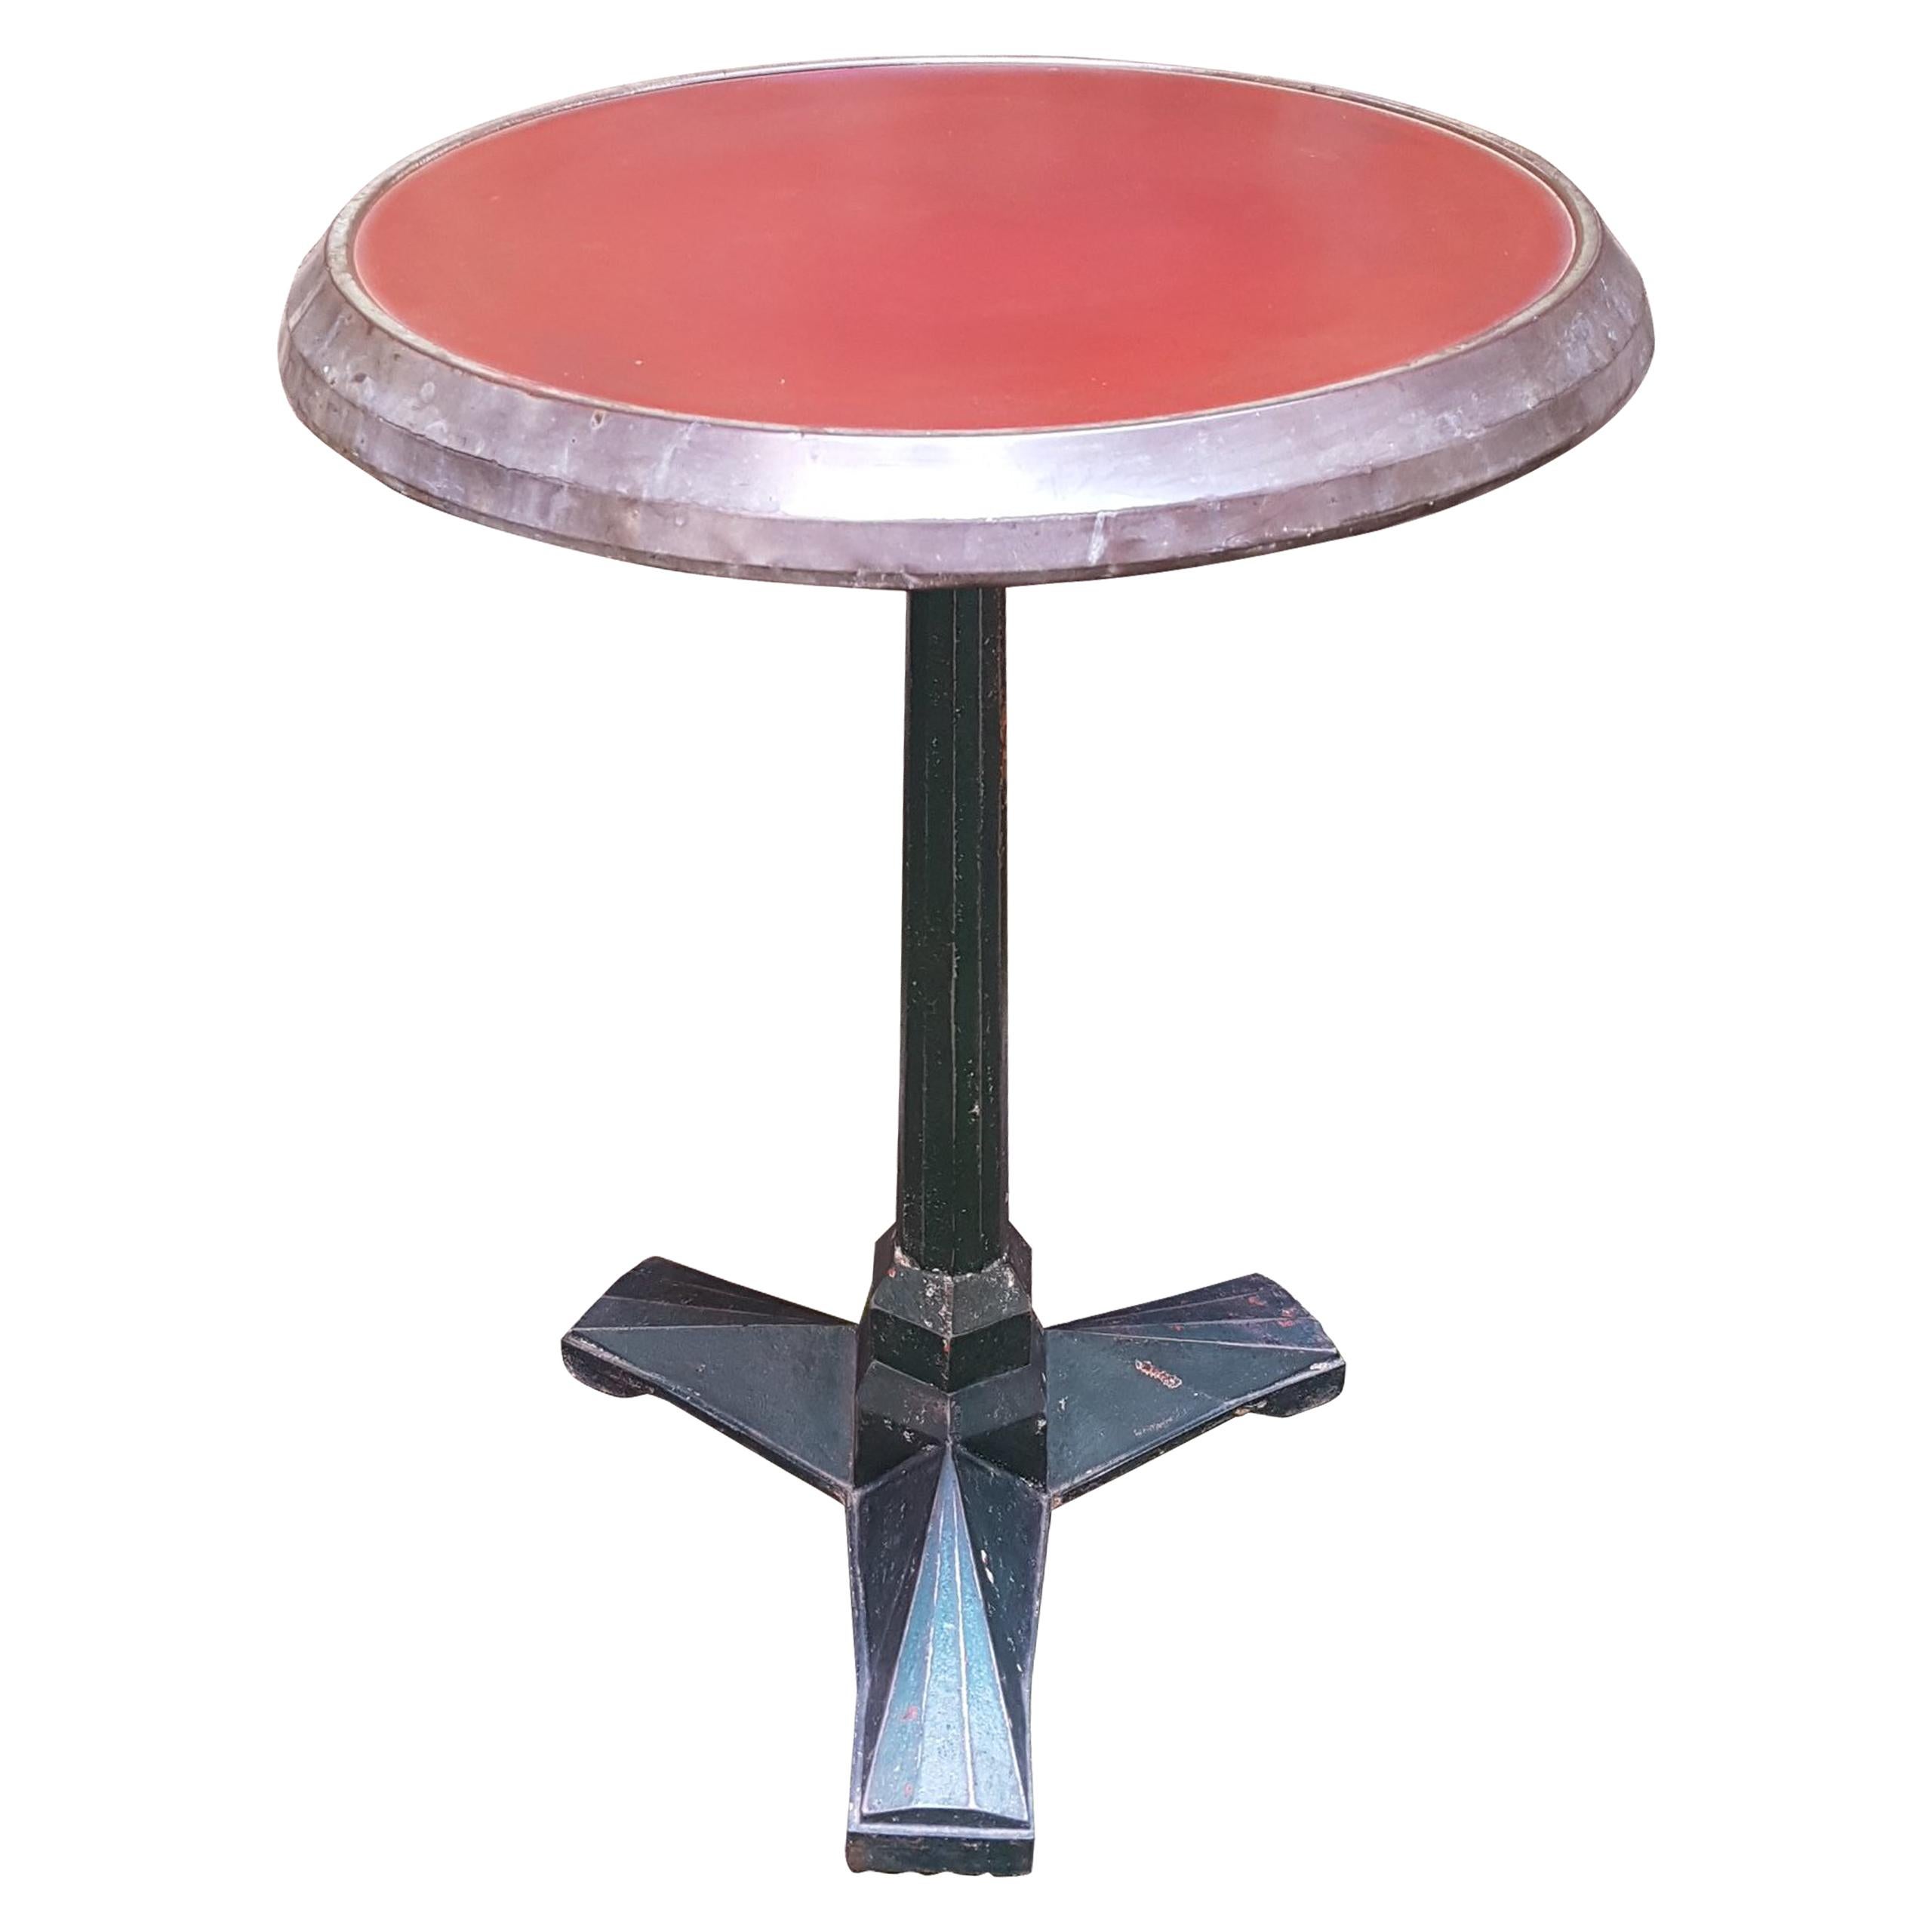 Midcentury Red Bistrot Table with Green Cast Iron Foot Customized Fisher Beer